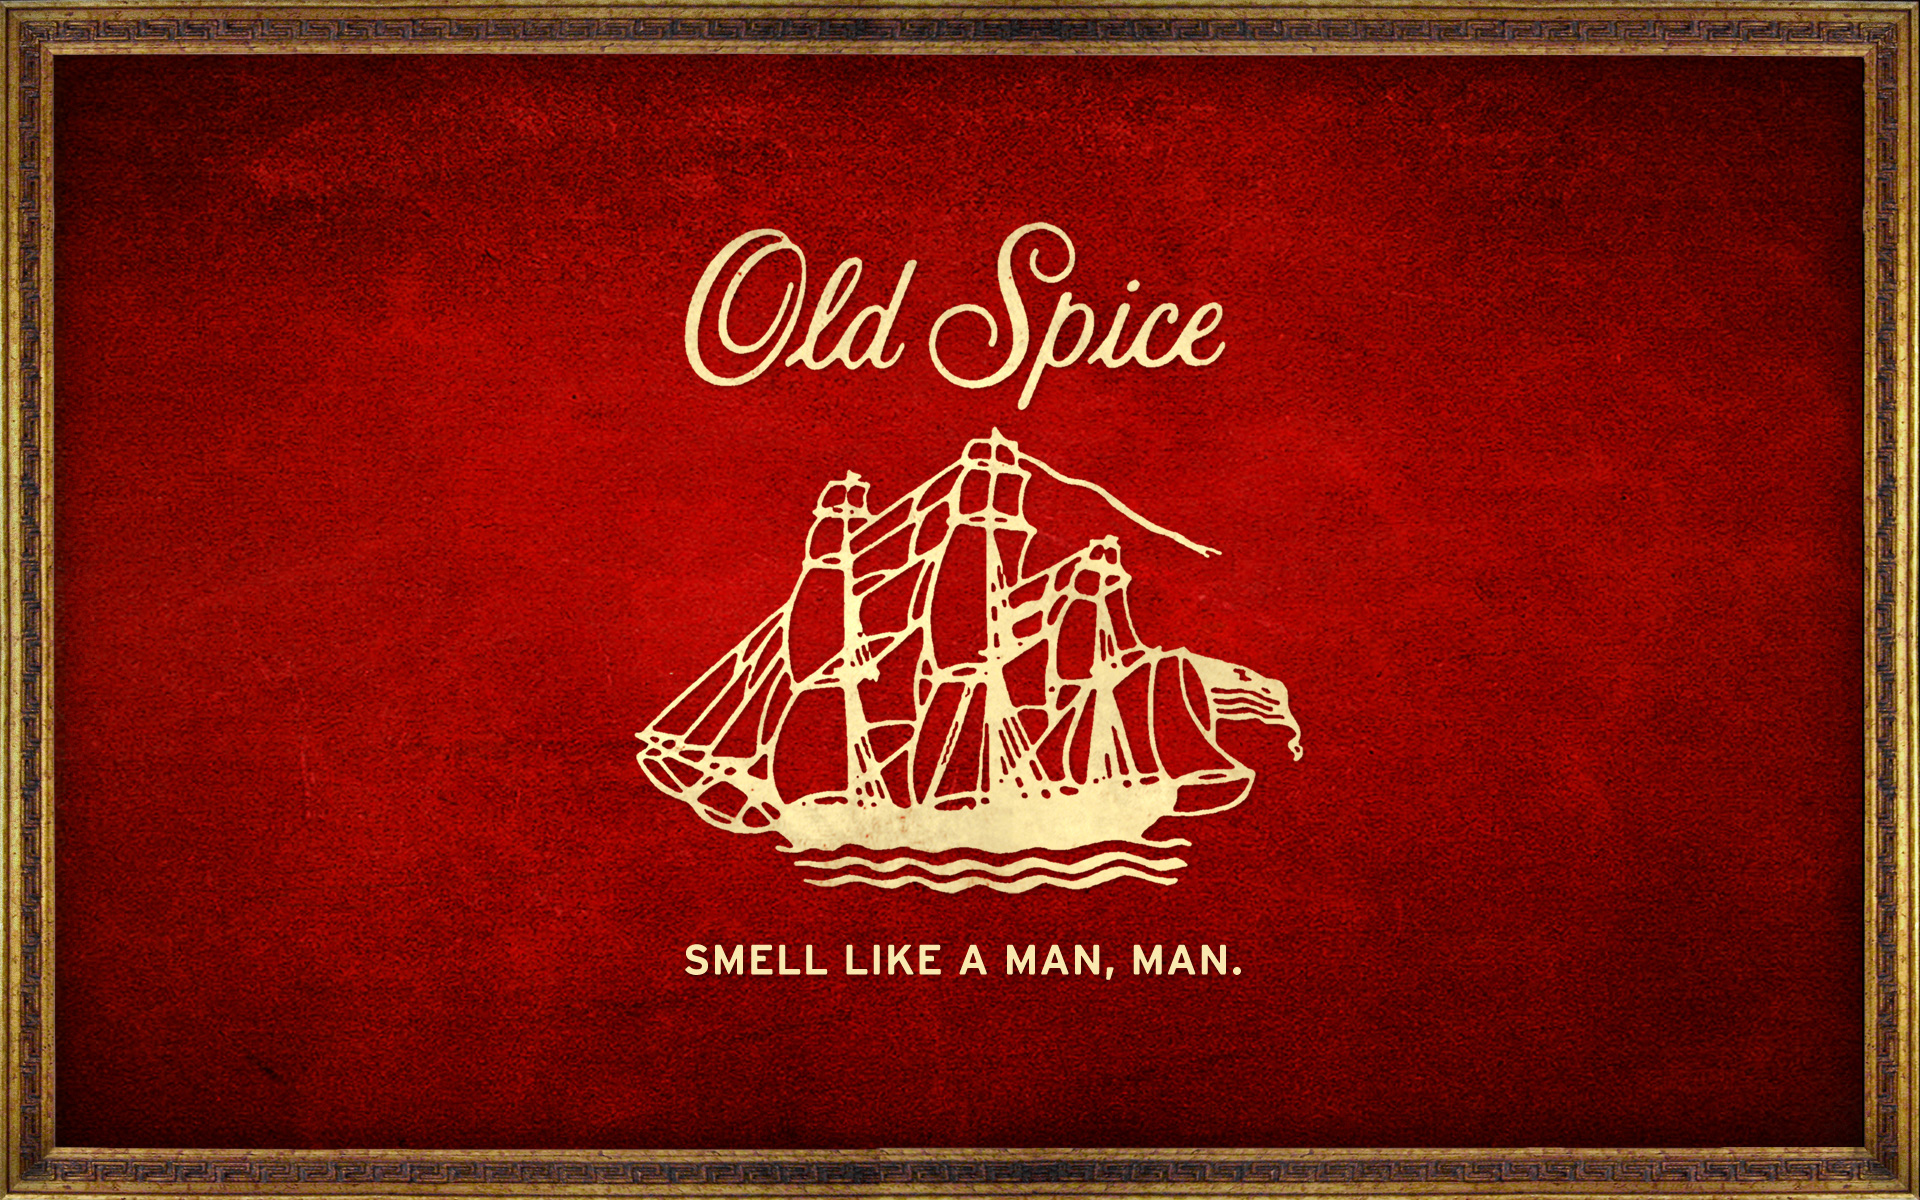 Download the Old Spice Wallpaper, Old Spice iPhone Wallpaper, Old